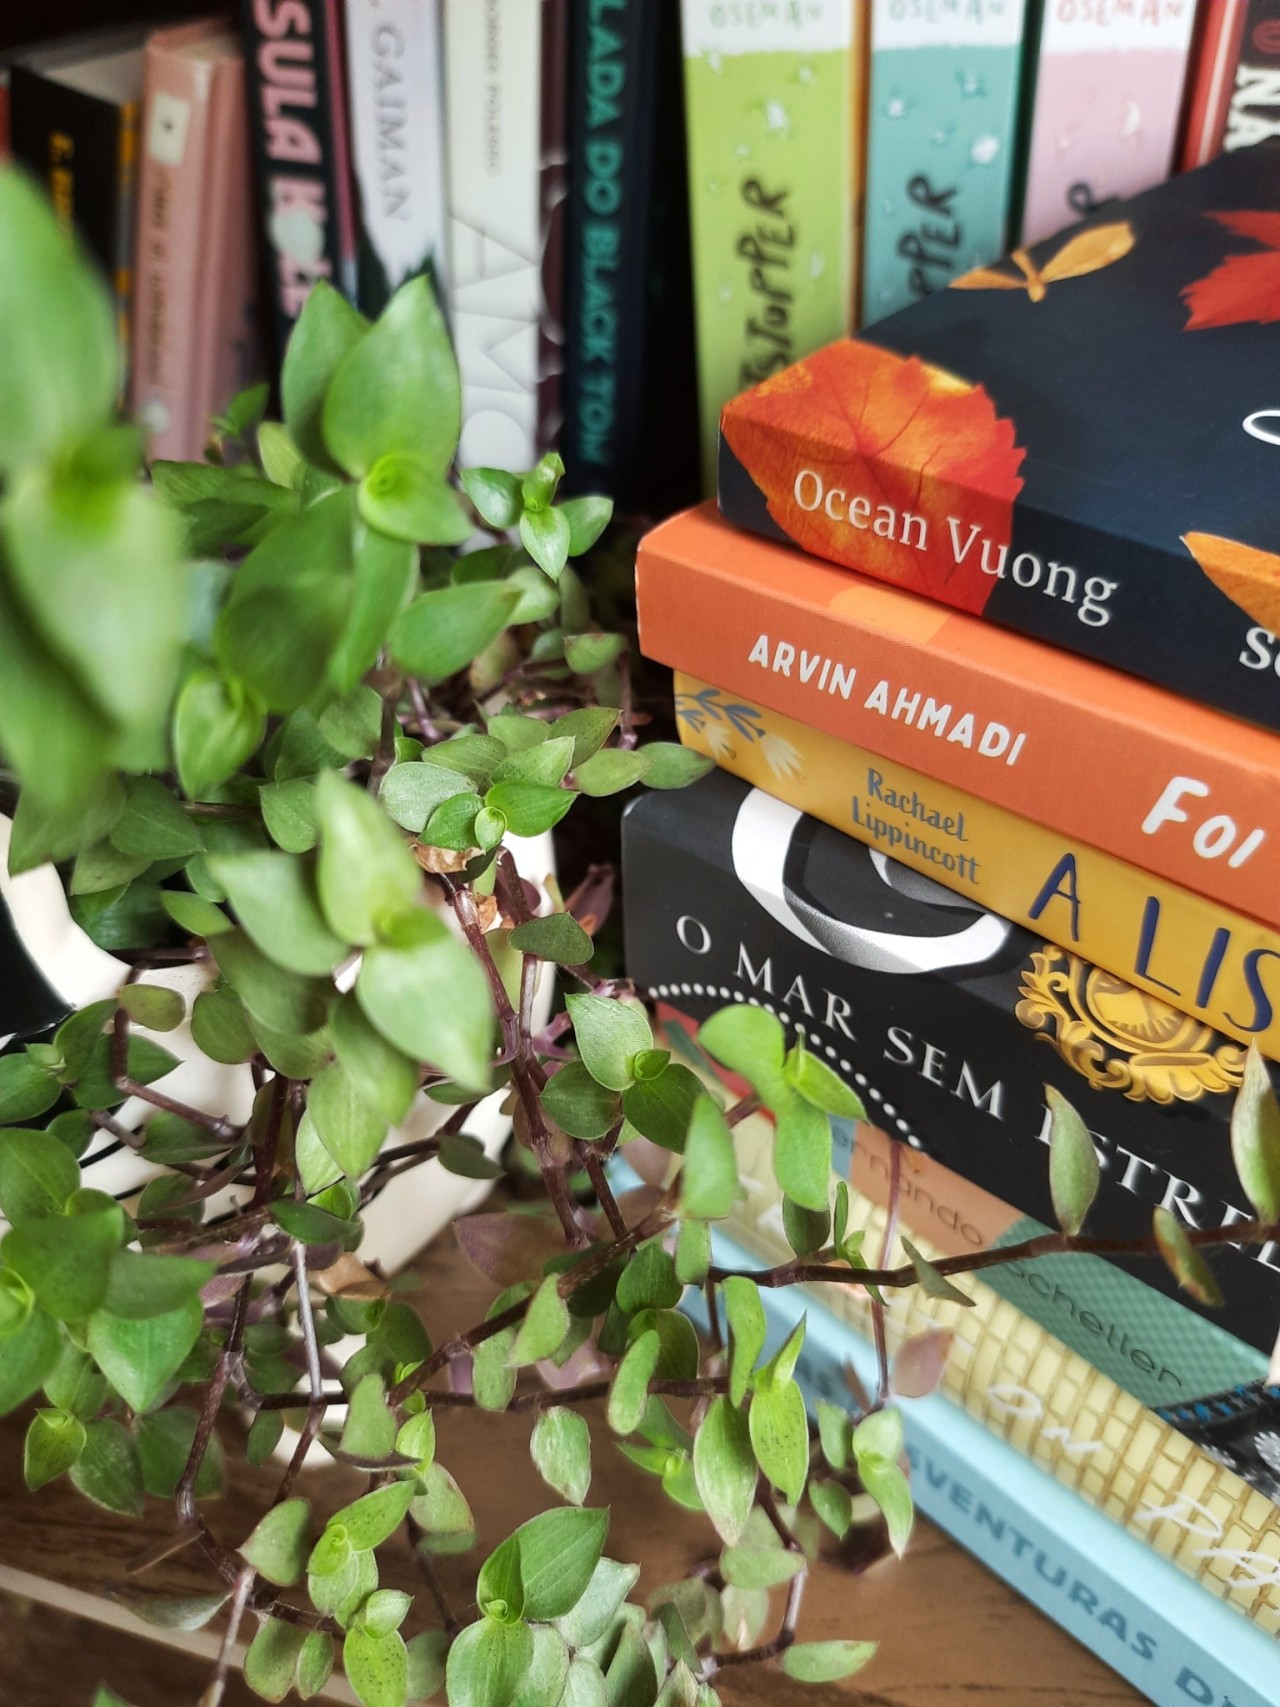 a close-up of the book stack with the books listed below. the vines of the plants are next to the book stack.